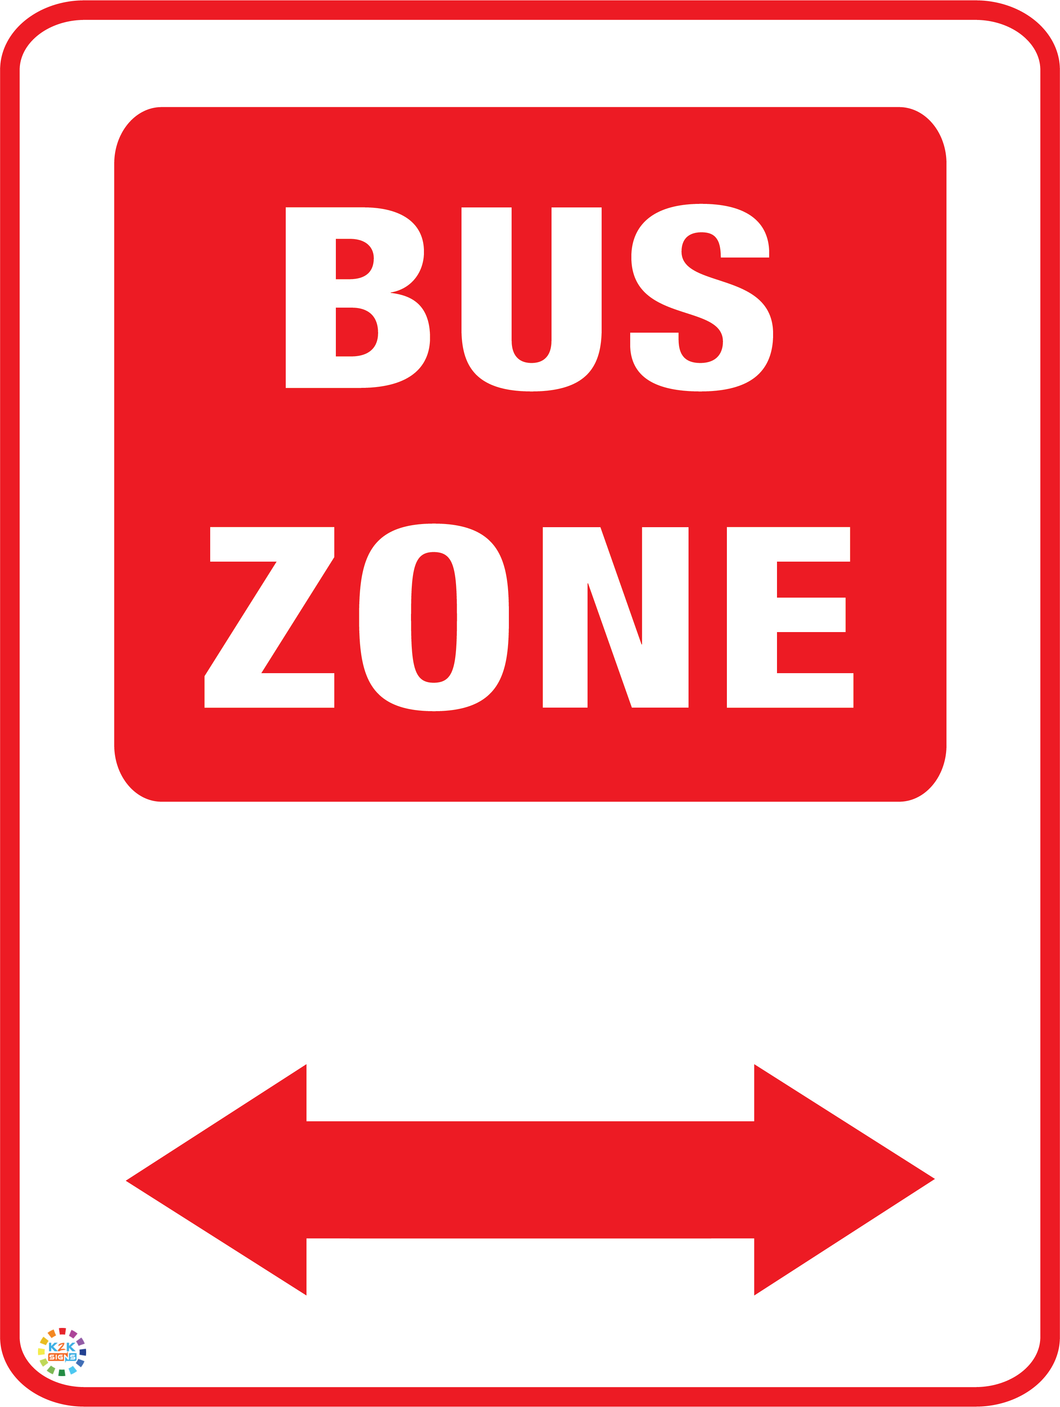 Bus Zone (Two Way Arrow) Sign